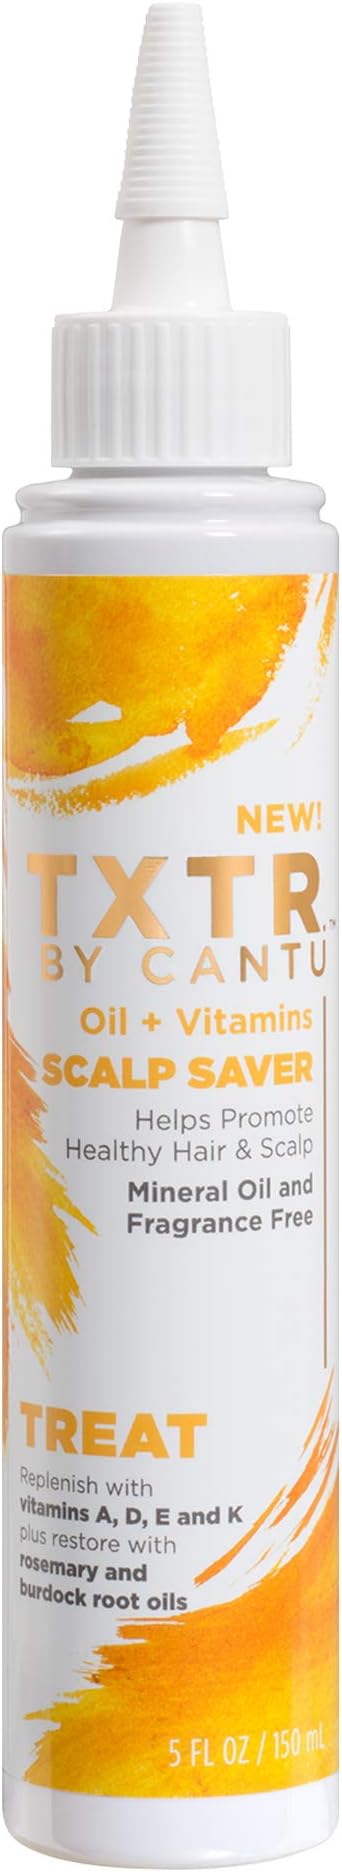 TXTR by CANTU - Scalp Saver with Oil + Vitamins